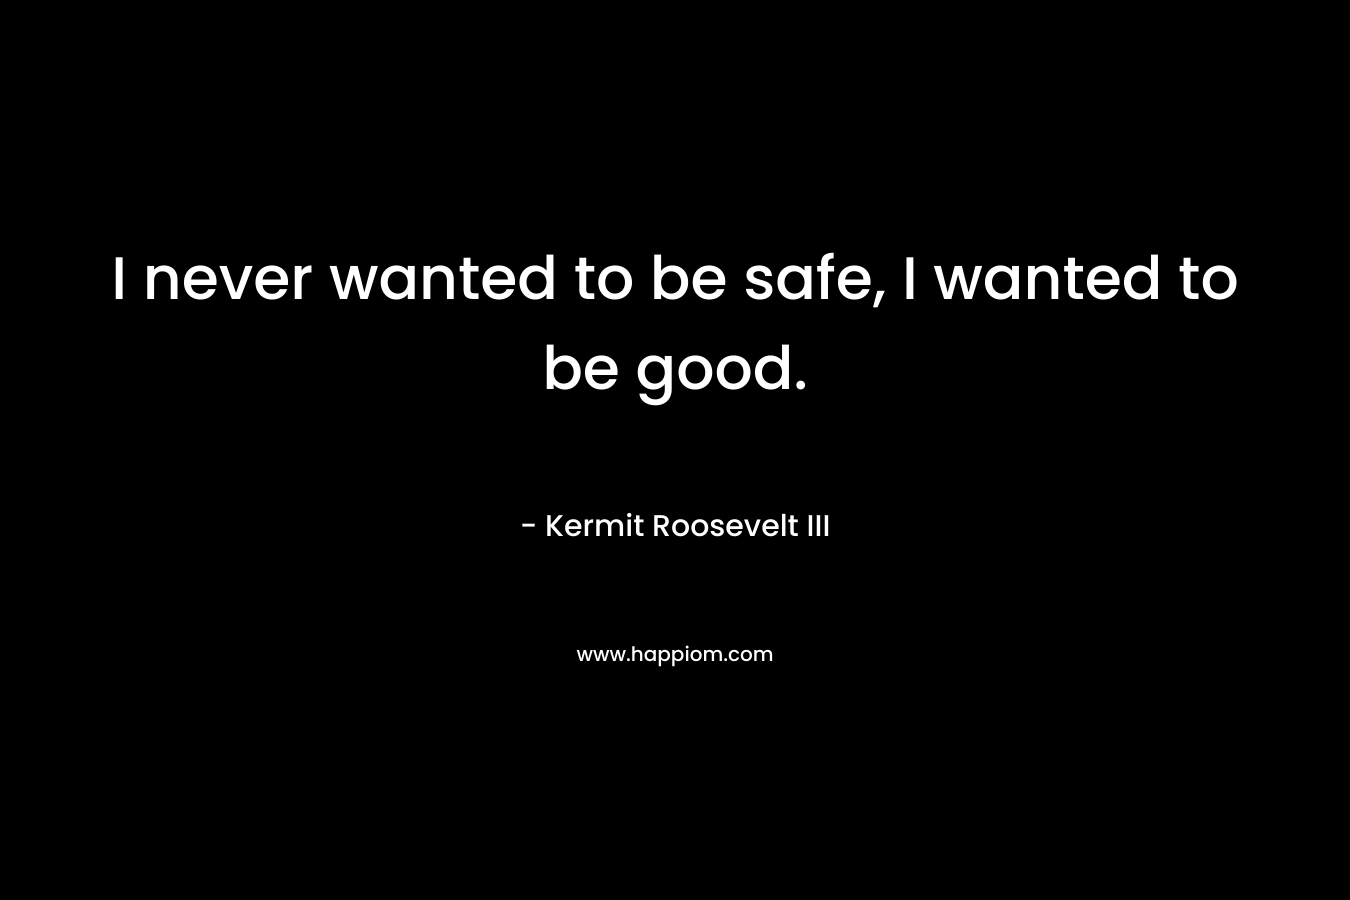 I never wanted to be safe, I wanted to be good. – Kermit Roosevelt III